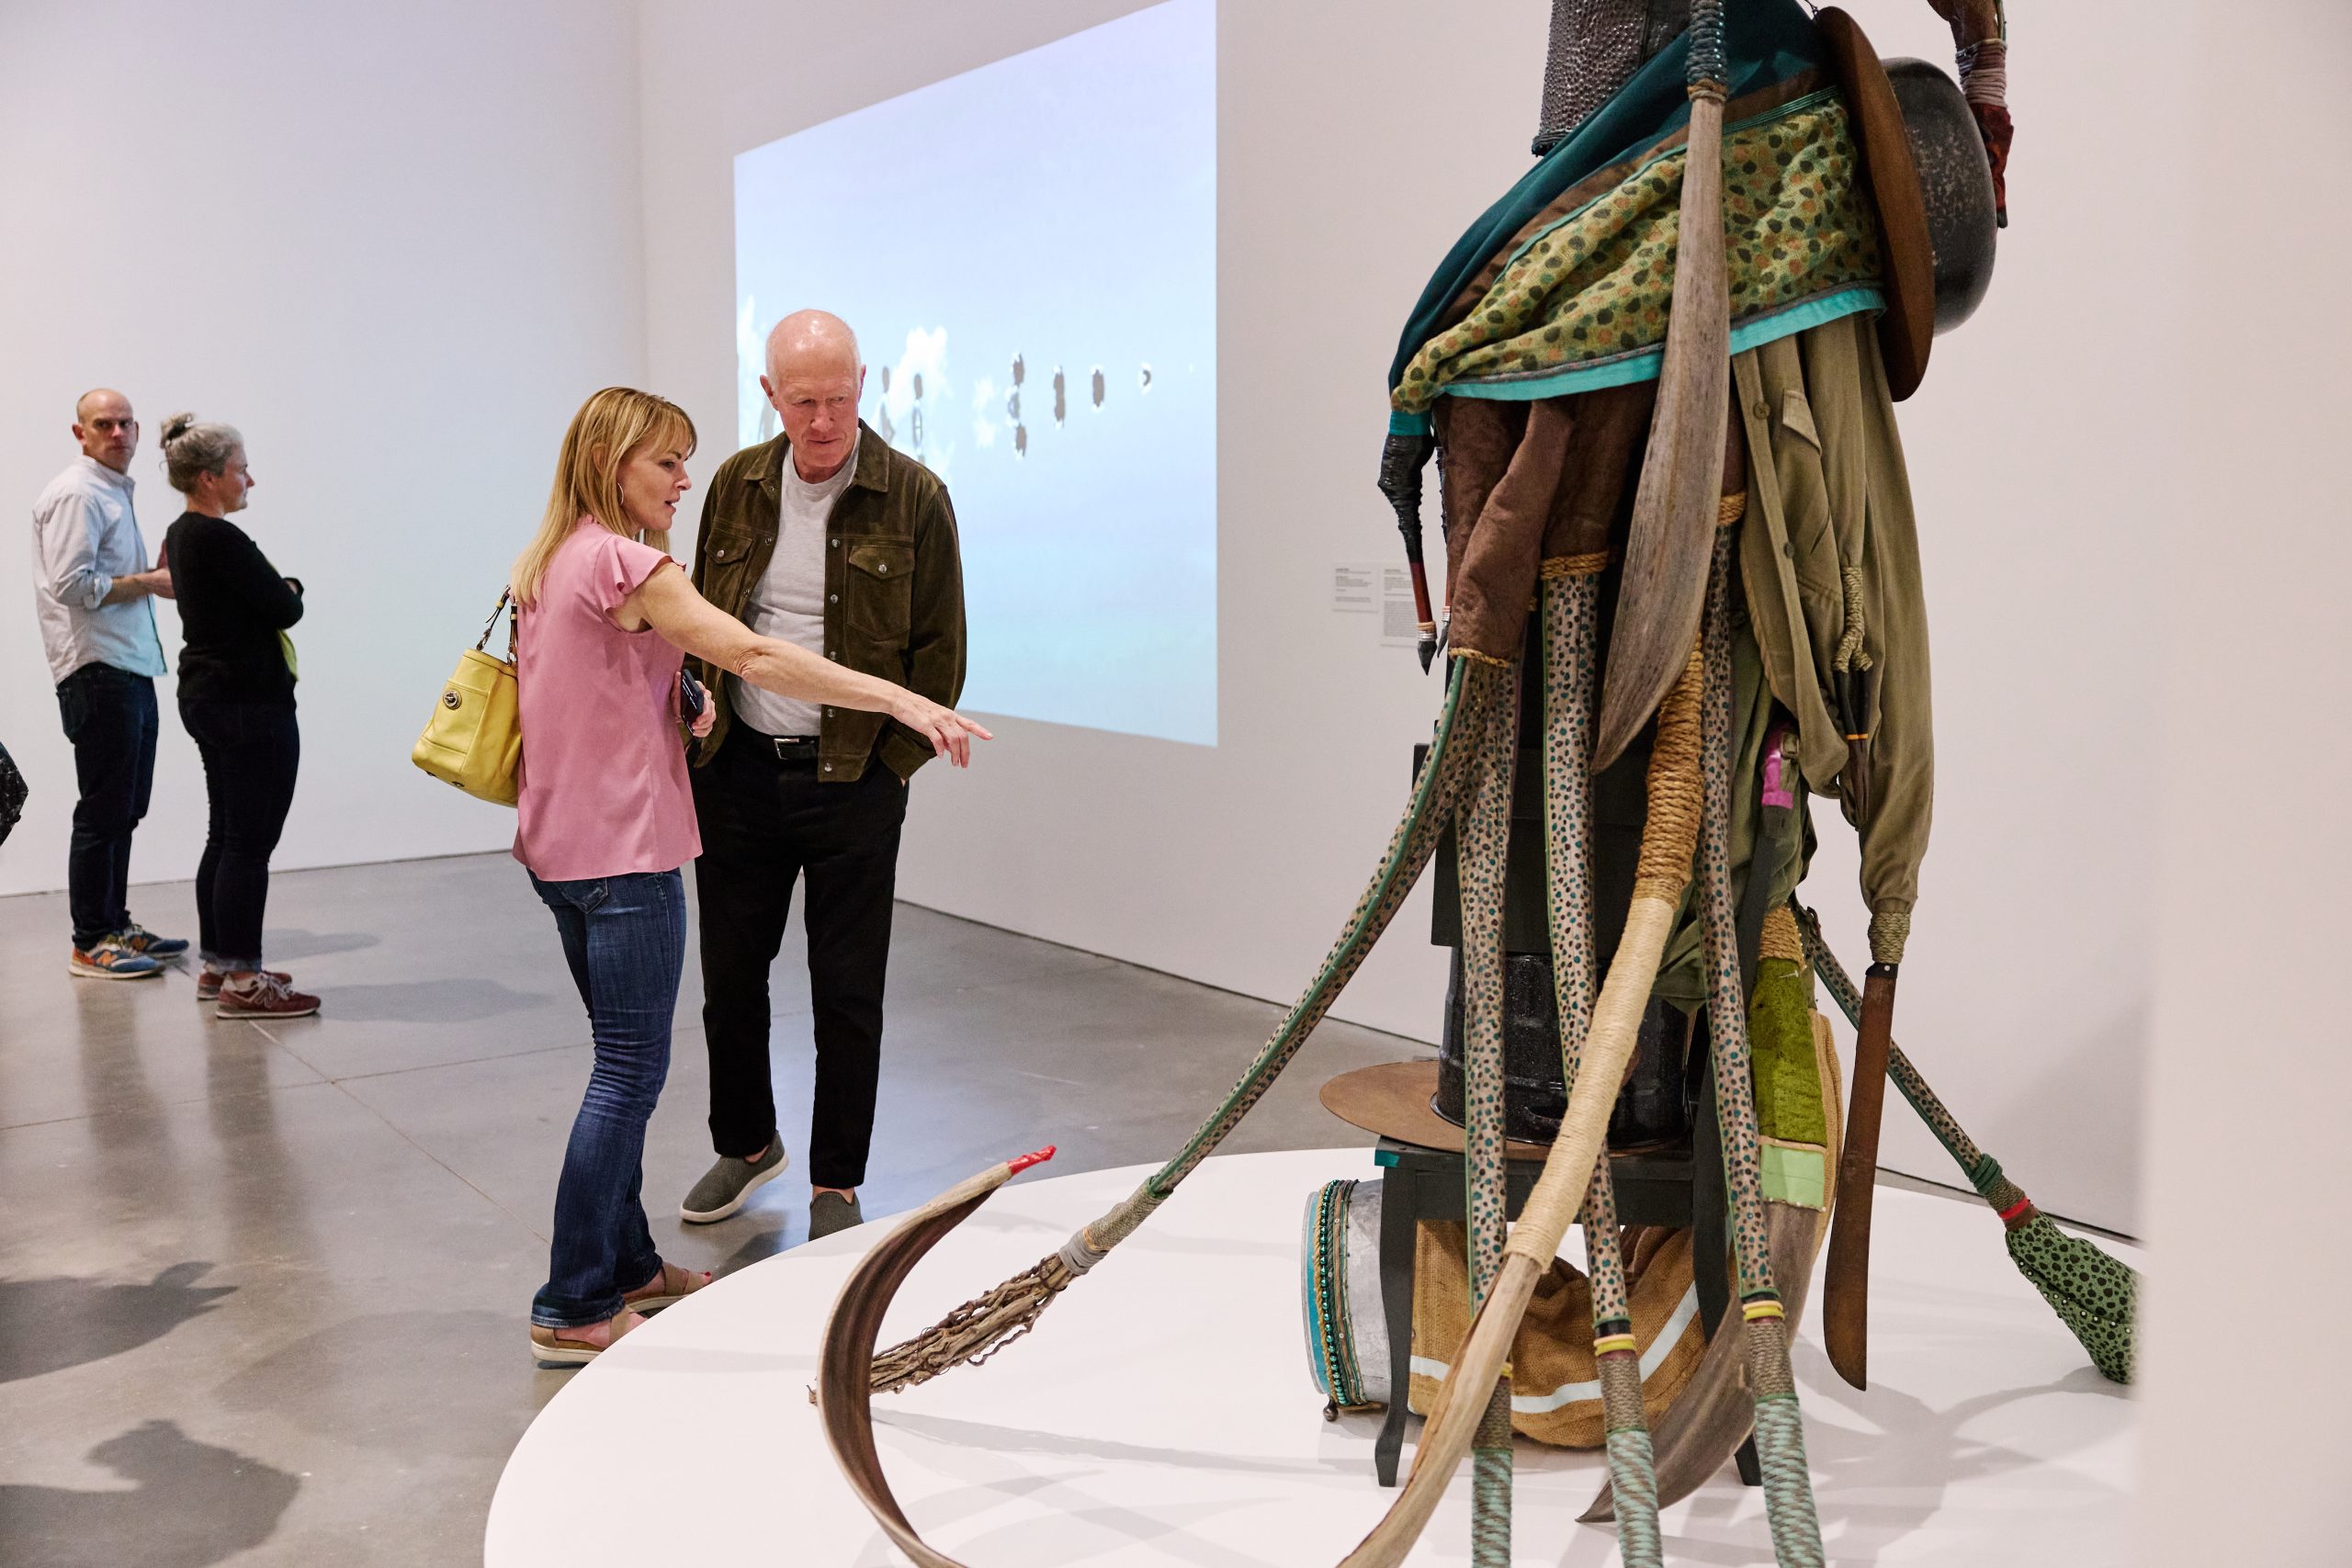 Two adults looking at a tall sculpture in a gallery